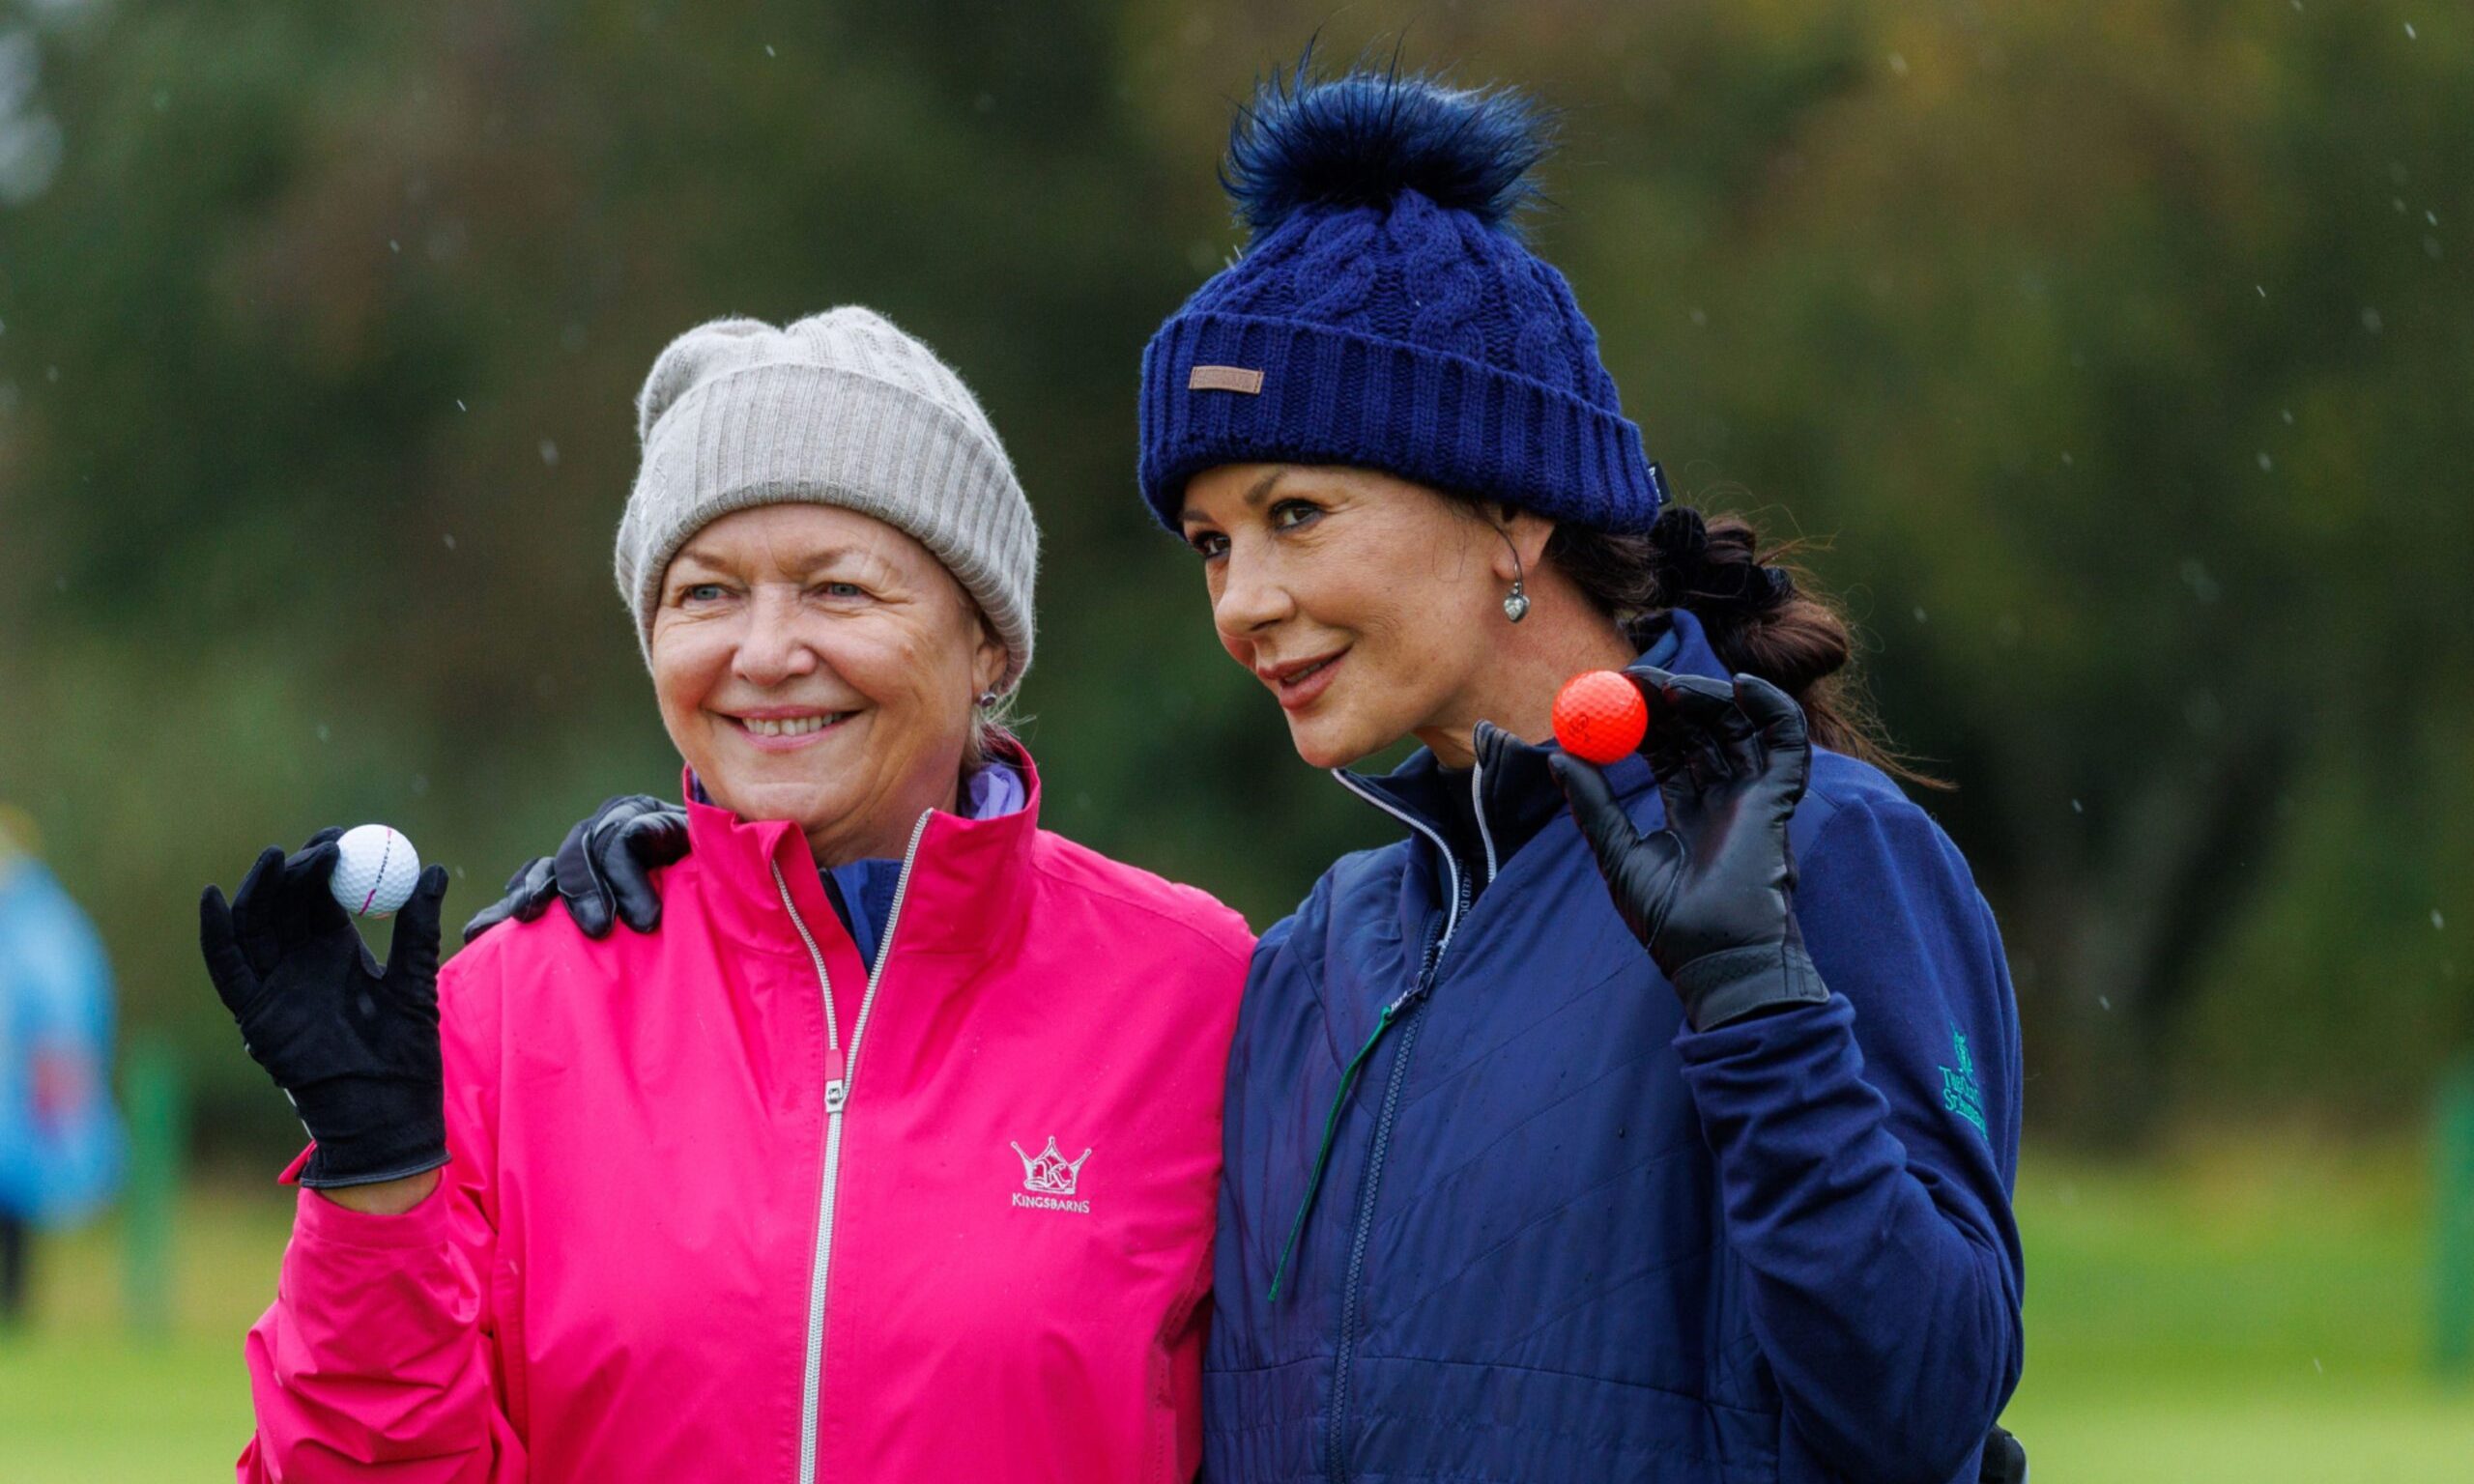 Catherine Zeta Jones celebrates holing her putt on the 8th green with playing partner Gaynor Rupert. Image: Kenny Smith/DC Thomson